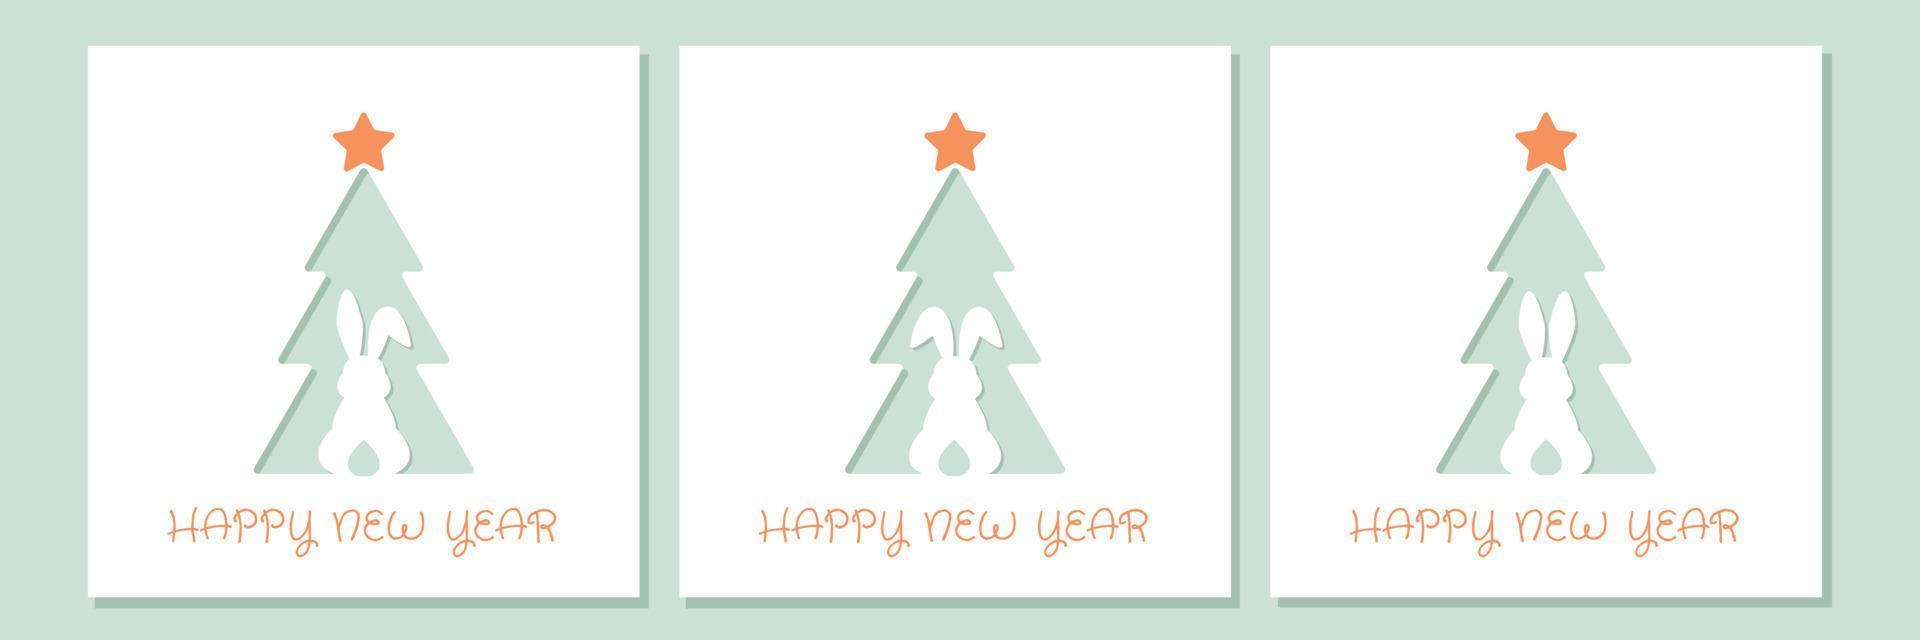 New Year card template in paper cut style. Rabbit on the background of the Christmas tree. vector